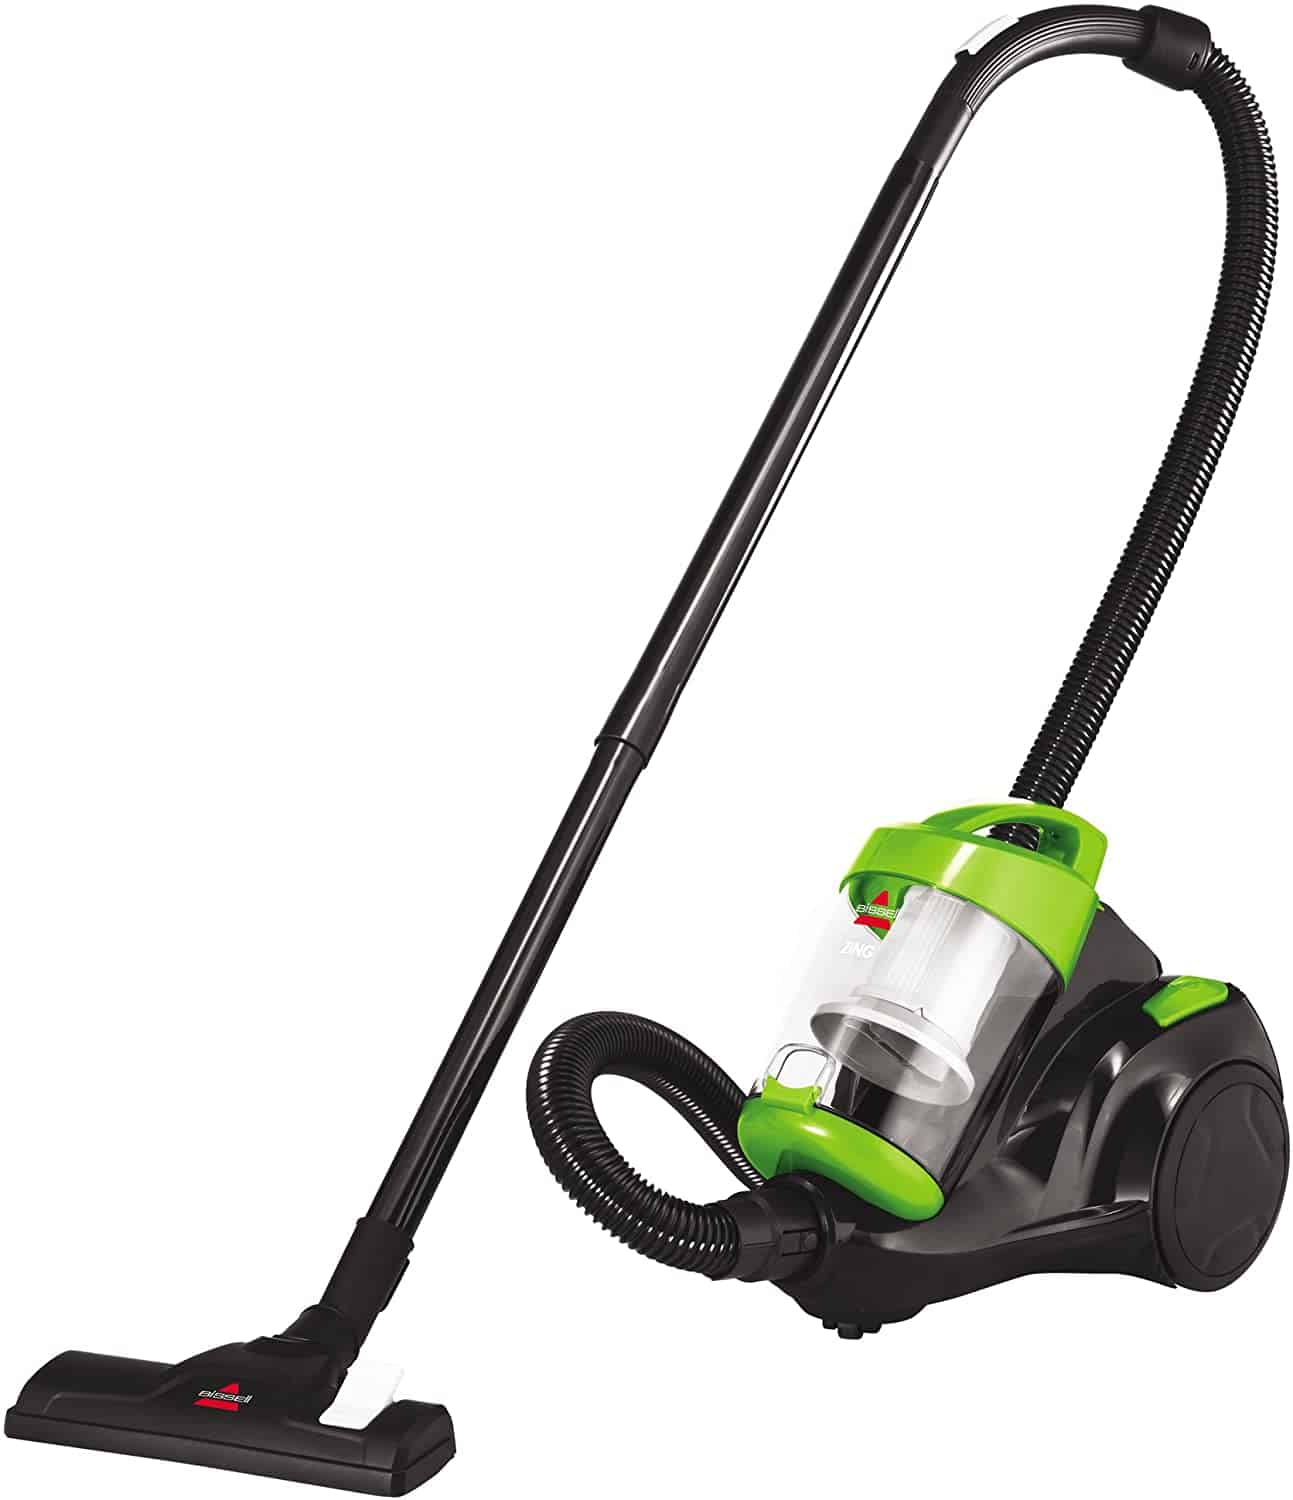 Bissell zing canister 2156 vacuum